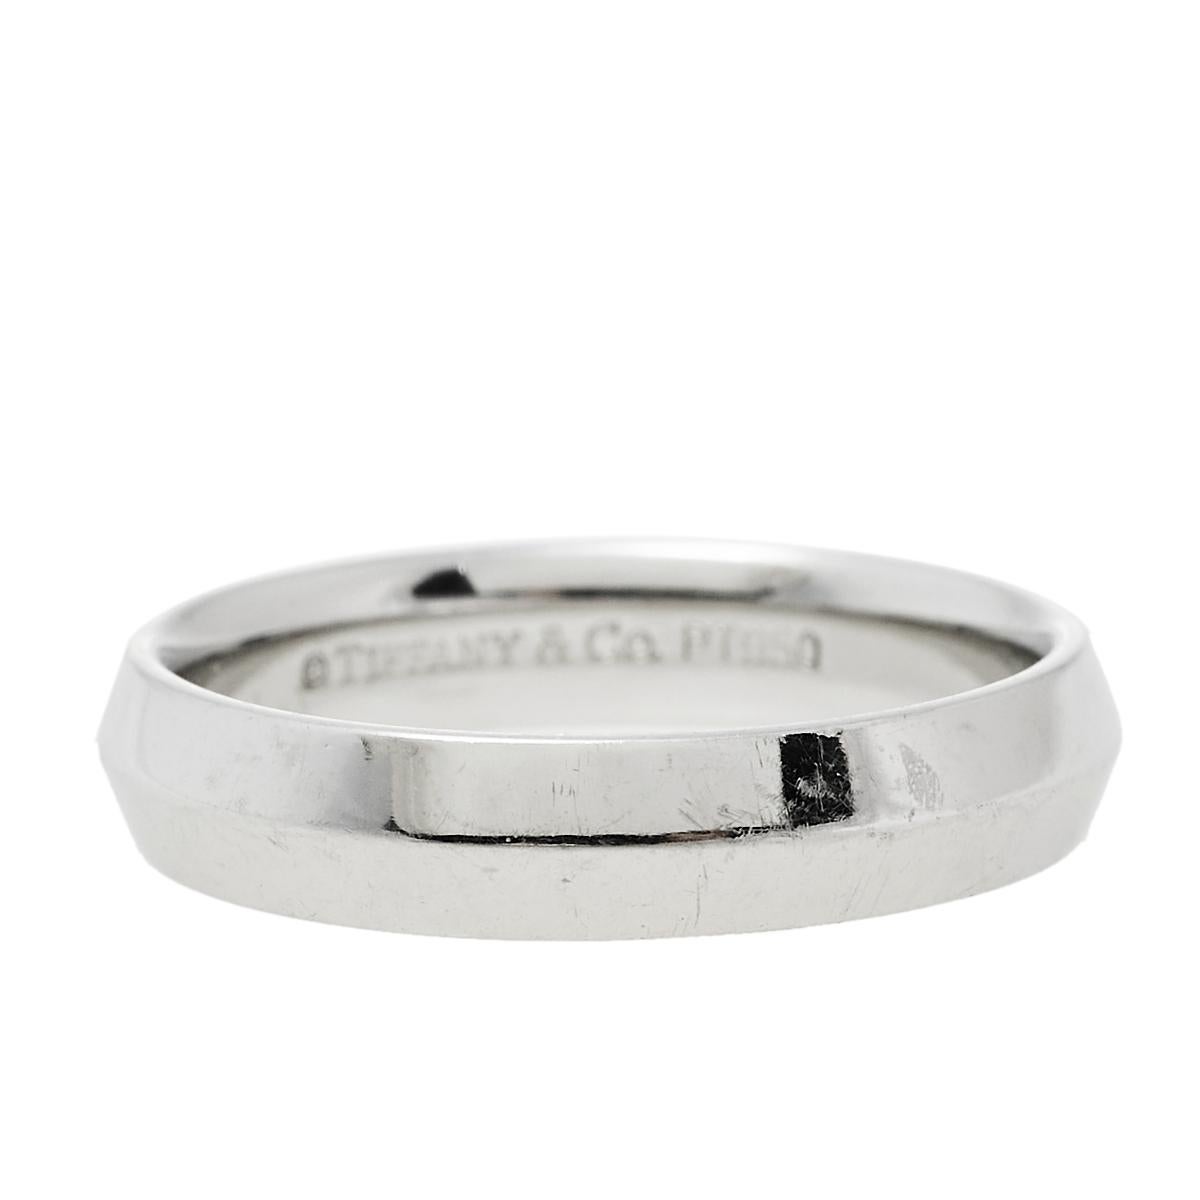 A classic look is yours to own with this ring from the house Tiffany & Co. Featuring a platinum design, this band ring elevates the overall appeal. Style it with your wedding dress for a charming look.

Includes: Original Box, Original Case
